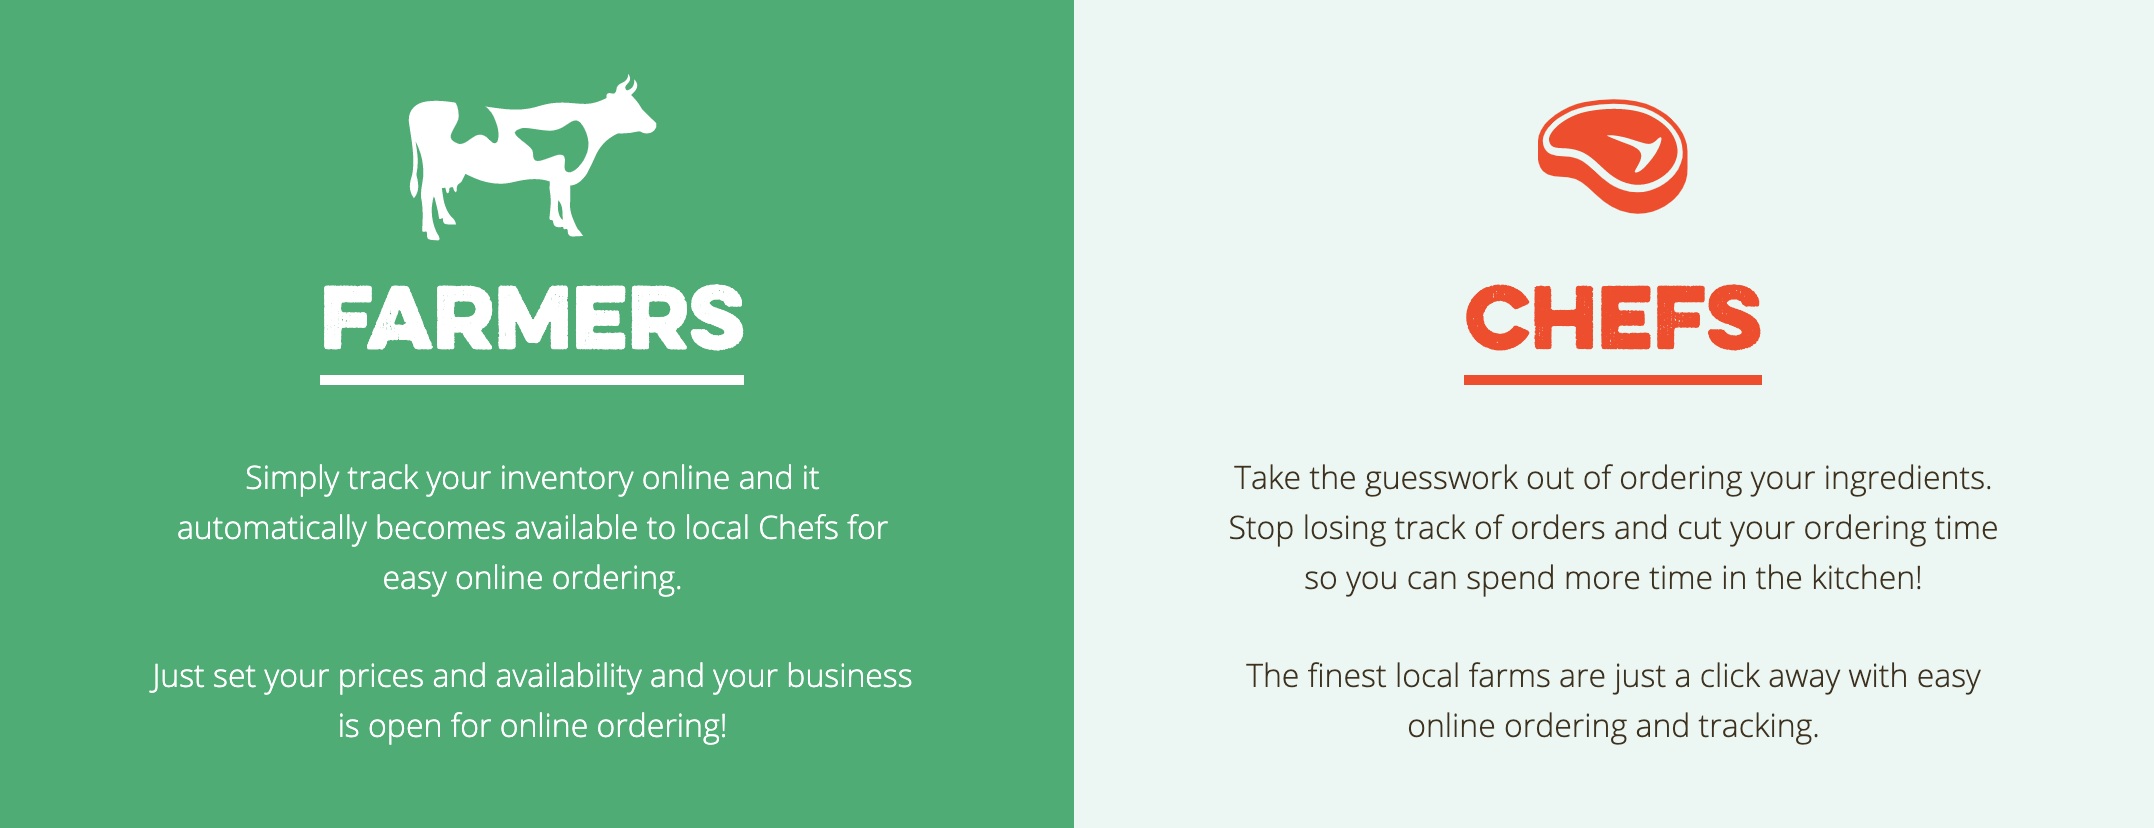 ToMarket’s platform speaks to the needs of both chefs and farmers.